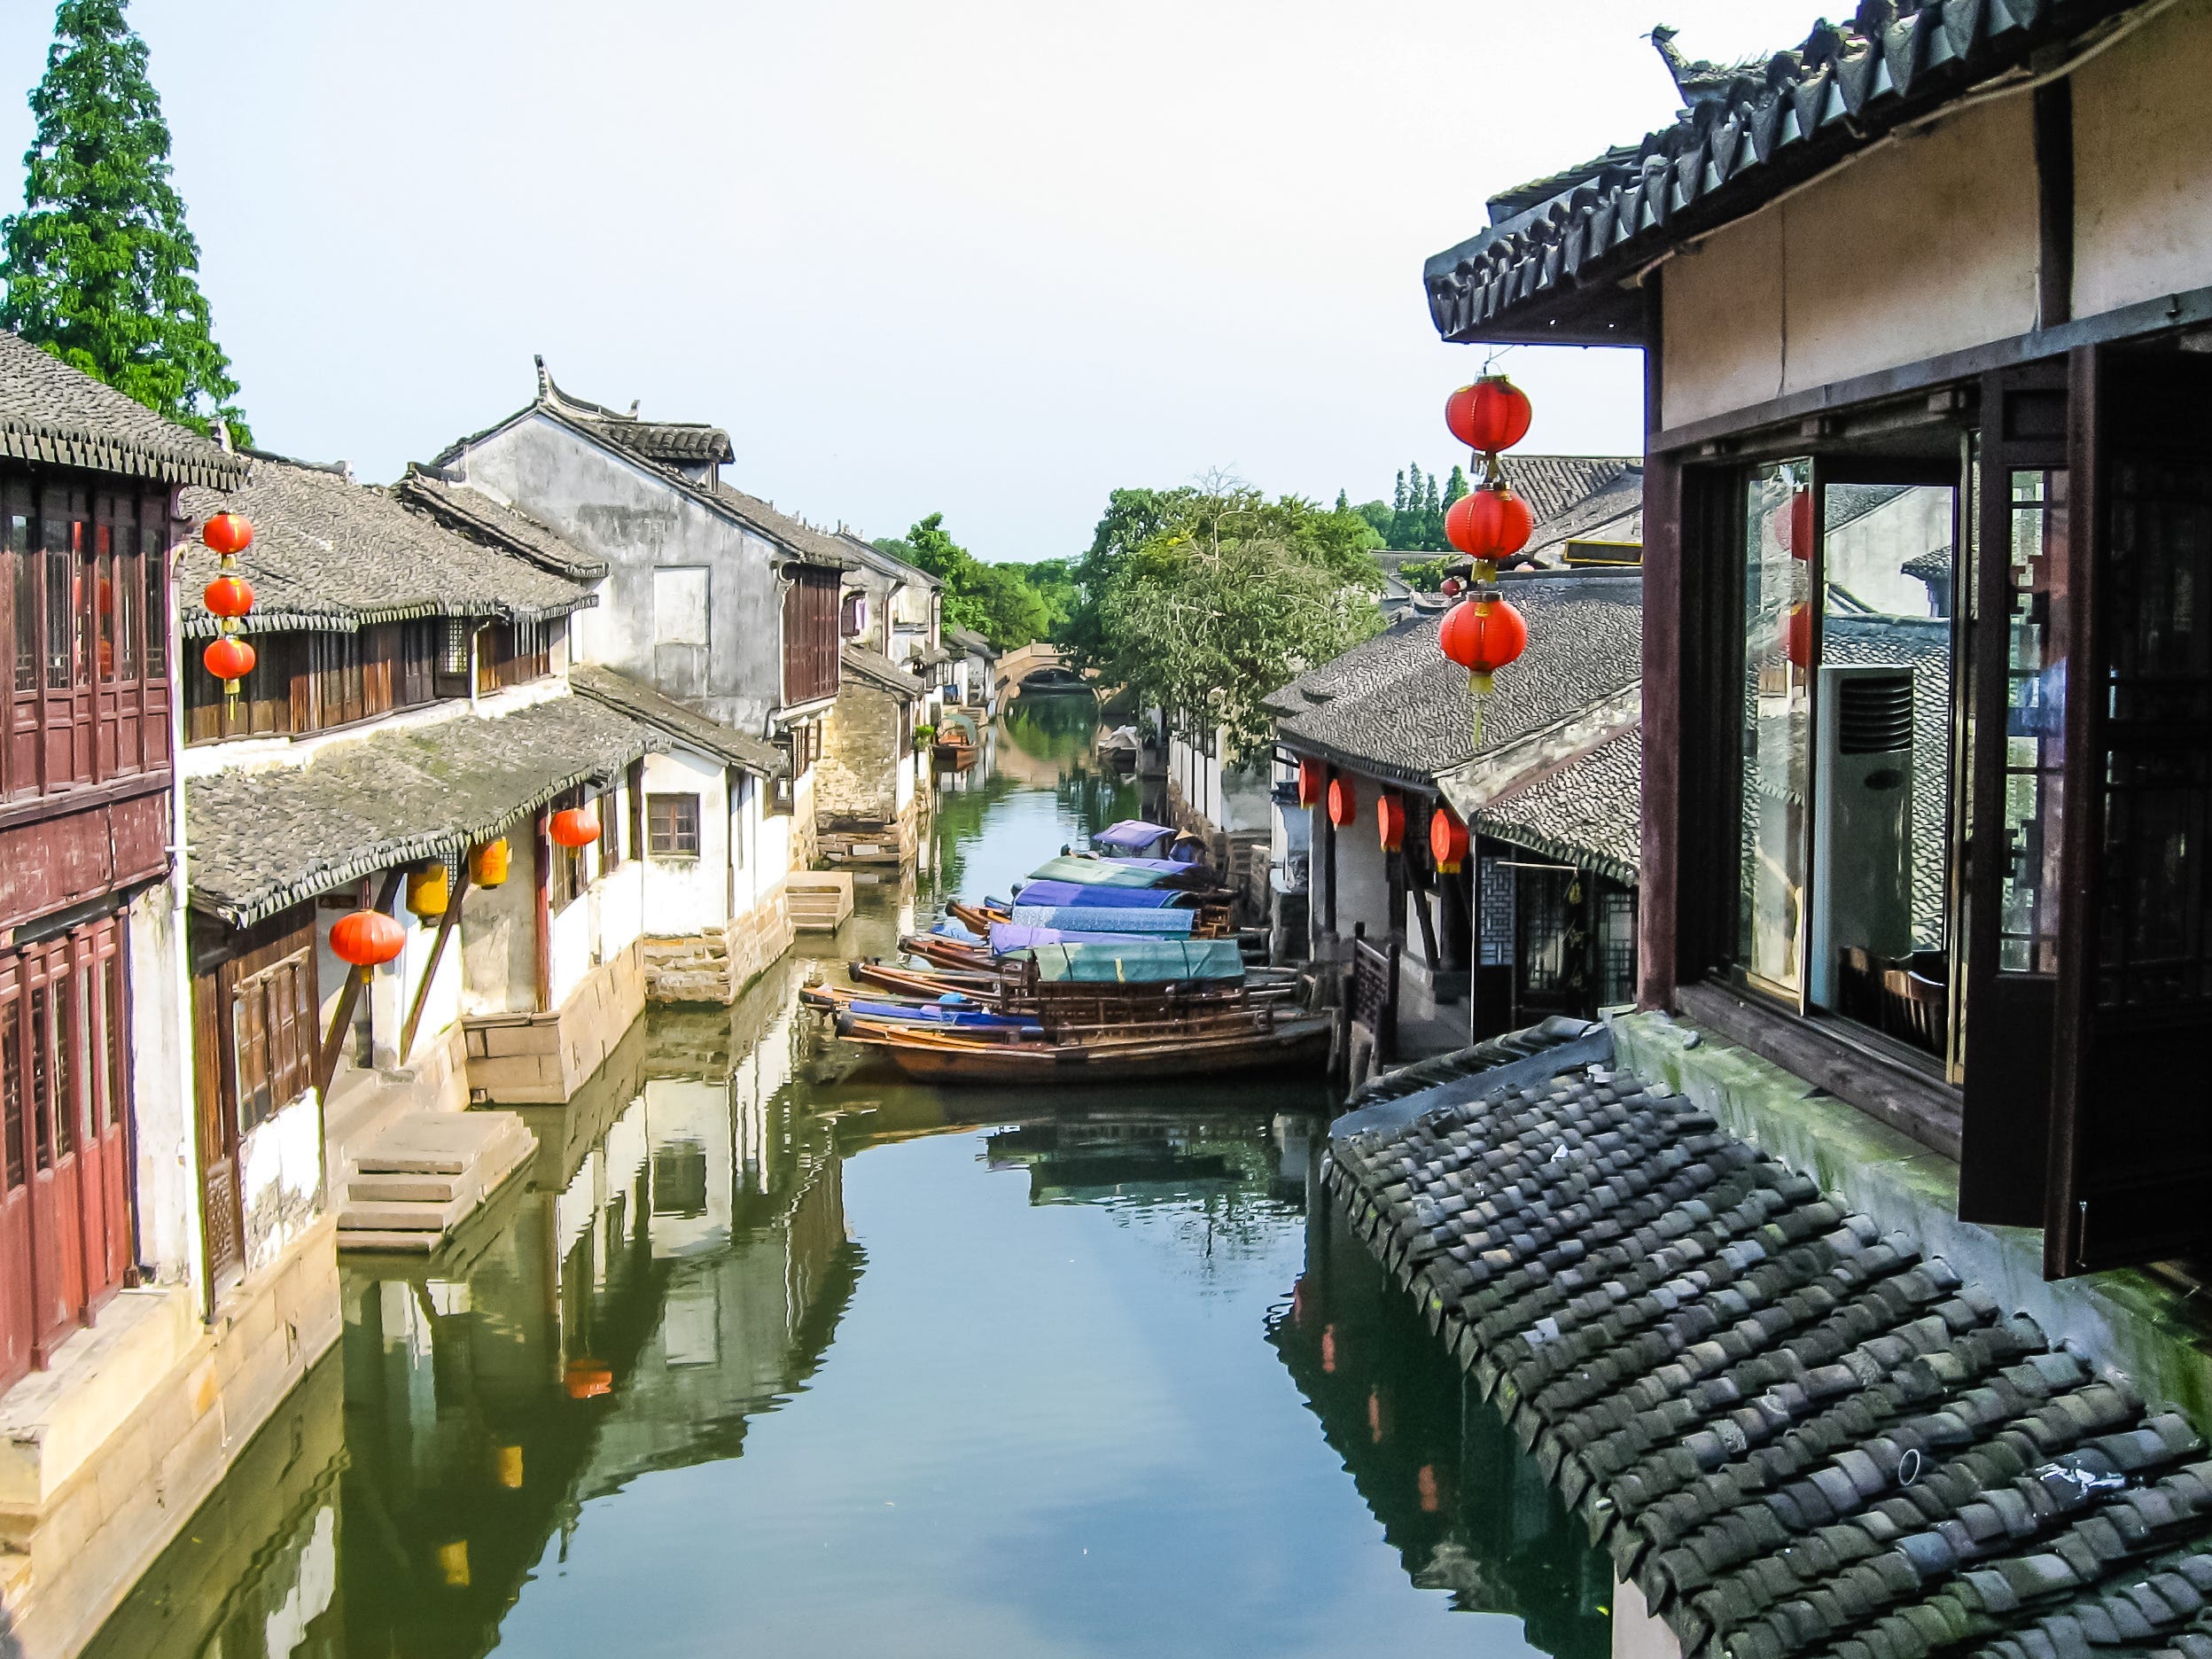 <p>Suzhou has been called the <a href="https://www.lonelyplanet.com/articles/suzhou-venice-of-china" rel="noopener nofollow sponsored">Venice of China</a> for its many ancient waterways, bridges, and canals, and the city's classical gardens are a <a href="https://whc.unesco.org/en/list/813/" rel="nofollow noopener sponsored">UNESCO World Heritage Site.</a></p><p>For around $150 total, you can stay three nights at <a href="https://affiliate.insider.com?h=55cb7f28e76fee9d19d64258cd257c22d7bb2520d2d30a332efbc187463b4106&platform=msn_reviews&postID=642ade21ba755654617ced15&site=in&u=https%3A%2F%2Fwww.booking.com%2Fhotel%2Fcn%2Ftong-li-1917zui-jiang-nan-jing-pin-ke-zhan.en-gb.html%3Faid%3D1185217%26label%3DAW-Suzhou-EN%26sid%3D272519ced60a04f14b0d6575f0794eda%26dist%3D0%26group_adults%3D1%26keep_landing%3D1%26no_rooms%3D1%26sb_price_type%3Dtotal%26type%3Dtotal%26checkin%3D2023-04-12%26checkout%3D2023-04-13%26group_children%3D0%26req_children%3D0%26req_adults%3D1%26hp_refreshed_with_new_dates%3D1&utm_source=msn_reviews" rel="noopener nofollow sponsored">Tongli 1917 Best South Inn,</a> a traditional guesthouse that also serves a $4 breakfast, according to Booking.com. </p><p>Keep costs down with a free stroll along the waterway beside <a href="https://affiliate.insider.com?h=e61eed6be4671e0a883fa43140e0b8125d9dd0880c61c551f9a68a51b5269a49&platform=msn_reviews&postID=642ade21ba755654617ced15&site=in&u=https%3A%2F%2Fwww.tripadvisor.com%2FAttraction_Review-g297442-d1999601-Reviews-Pingjiang_Road-Suzhou_Jiangsu.html&utm_source=msn_reviews" rel="nofollow noopener sponsored">Pingjiang Road,</a> a historic road dating back to <a href="https://www.travelchinaguide.com/attraction/jiangsu/suzhou/pingjiang-road.htm" rel="nofollow noopener sponsored">the 12th century</a> with traditional architecture, quaint shops, and tea houses. A few minutes' walk away, the <a href="https://www.szmuseum.com/En/Home/Index" rel="noopener nofollow sponsored">Suzhou Museum</a> has free entry to view Chinese paintings, calligraphy, and ancient artifacts.</p><p>As for dining, you can sample Suzhou's food scene on an alleyway <a href="https://lostplate.com/suzhou-alleyway-food-tour/" rel="noopener nofollow sponsored">food tour</a> with a local guide. The three-and-a-half-hour experience costs $55 per person, and participants try dishes like Suzhou noodles in broth, wontons, and fried sesame balls.</p><p>If there's still room in your budget, for $200, take a <a href="https://affiliate.insider.com?h=03ca40e8058b4cfe0b9c690874fa4626c68f7281b497c528a4c0316d32bb0deb&platform=msn_reviews&postID=642ade21ba755654617ced15&site=in&u=https%3A%2F%2Fwww.tripadvisor.com%2FAttractionProductReview-g297442-d16796478-4_Hour_Flexible_Suzhou_City_Highlights_Private_Tour-Suzhou_Jiangsu.html&utm_source=msn_reviews" rel="noopener nofollow sponsored nofollow sponsored">private tour</a> of Suzhou's most significant sites, which includes the <a href="http://www.suzhou.gov.cn/szsenglish/sjwhyclm/201611/0e774293426145f6b4b00d3a5717c6df.shtml" rel="noopener nofollow sponsored">Humble Administrator's Garden</a>, a lush property with pavilions and lotus ponds. The tour also goes to <a href="https://affiliate.insider.com?h=042ba0a24895d1d6642119c5445492c764ef51d76c11fcdda2339bb8176b71bf&platform=msn_reviews&postID=642ade21ba755654617ced15&site=in&u=https%3A%2F%2Fwww.tripadvisor.com%2FAttraction_Review-g297442-d1813910-Reviews-Panmen_Gate-Suzhou_Jiangsu.html&utm_source=msn_reviews" rel="nofollow noopener sponsored">Panmen Gate,</a> a famous ancient landmark, as well as <a href="https://affiliate.insider.com?h=e70fe7c9946f42da2bee5724c7d2e41638b3a6a563c70444349a1983ba2a69b4&platform=msn_reviews&postID=642ade21ba755654617ced15&site=in&u=https%3A%2F%2Fwww.tripadvisor.com%2FAttraction_Review-g297442-d487767-Reviews-Tiger_Hill-Suzhou_Jiangsu.html&utm_source=msn_reviews" rel="nofollow noopener sponsored">Tiger Hill</a>, a large park that's home to the <a href="https://affiliate.insider.com?h=8f0f19611c46f6aa99479a567859d0189ce3b9261f7be99957dcb14396c42983&platform=msn_reviews&postID=642ade21ba755654617ced15&site=in&u=https%3A%2F%2Fwww.tripadvisor.com%2FAttraction_Review-g297442-d556025-Reviews-Cloud_Rock_Leaning_Pagoda_Yunyan_Ta-Suzhou_Jiangsu.html&utm_source=msn_reviews" rel="nofollow noopener sponsored">Yunyan Pagoda,</a> a temple that is said to have <a href="http://www.suzhou.gov.cn/szsenglish/szgt/201611/5e2a12729cfe4151ad21506c251487ee.shtml" rel="nofollow noopener sponsored">first been built in 959 AD</a> and has been repaired and reconstructed many times since.</p>